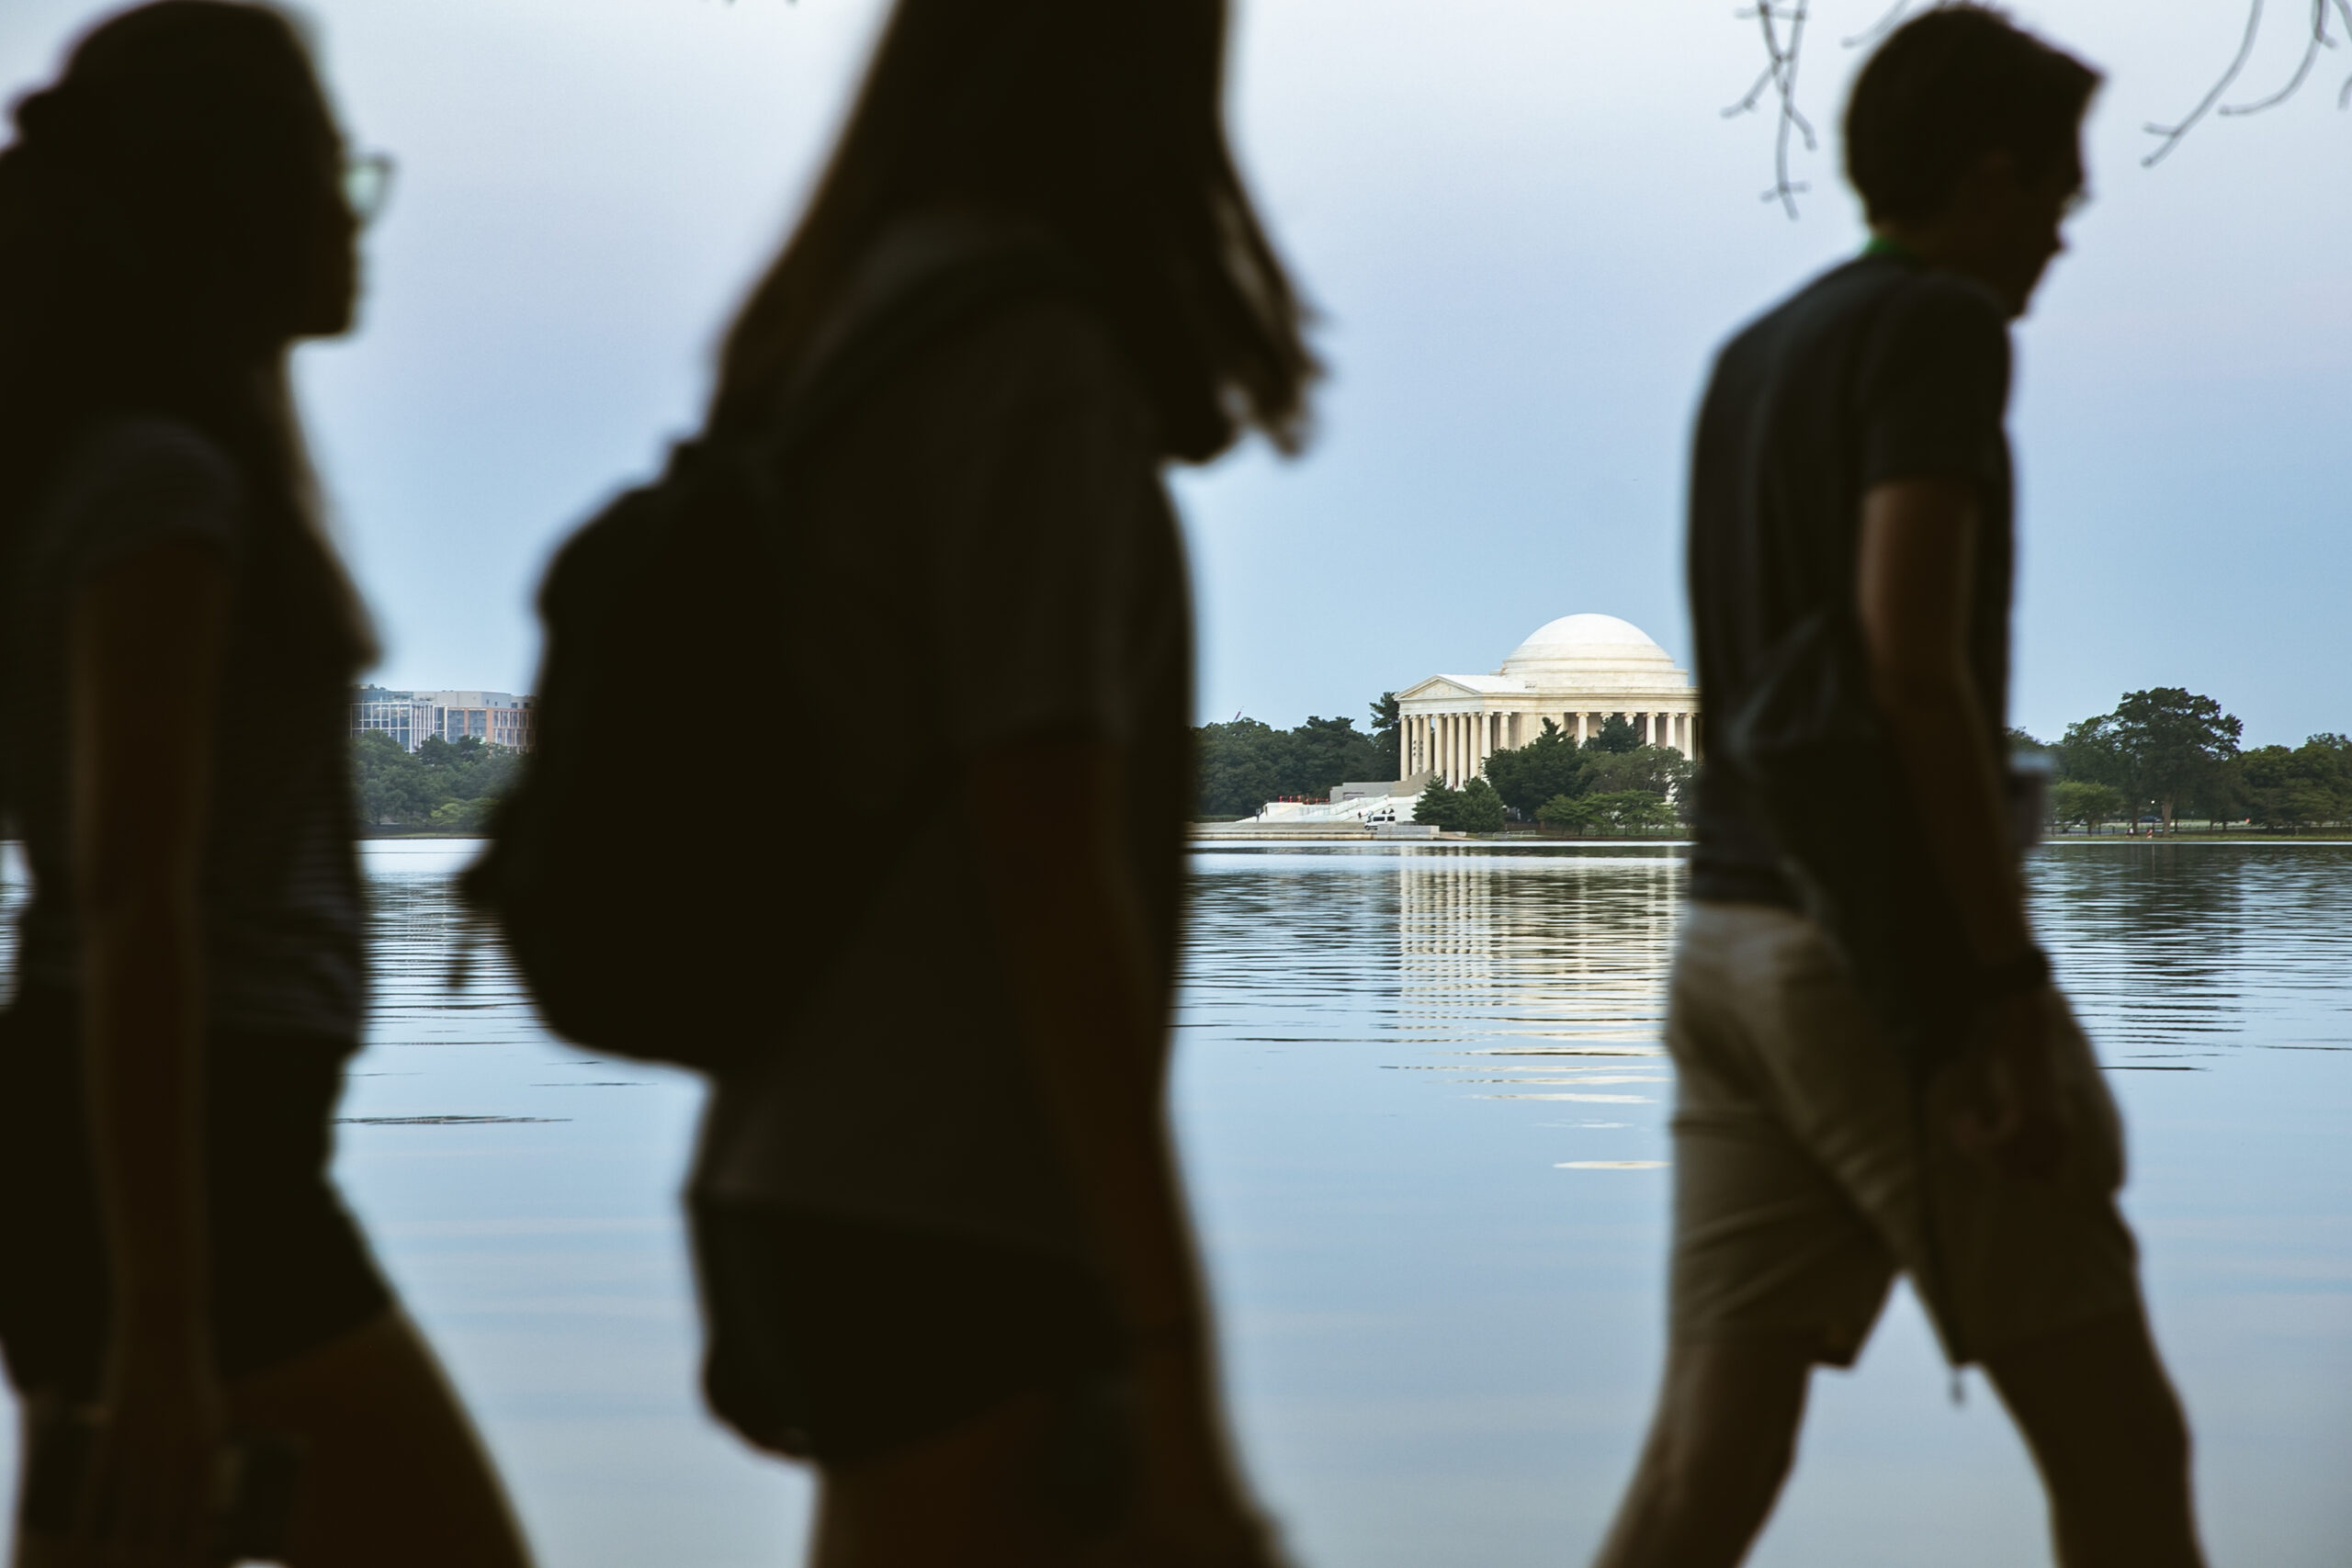 Three people with blurred and shadowed silhouettes appear in the foreground of the photo. Behind them, the Jefferson Memorial in D.C. can be seen in focus. The photo takes place on a summer day, and the memorial is reflect on the blue water of the tidal basin in Washington, D.C.